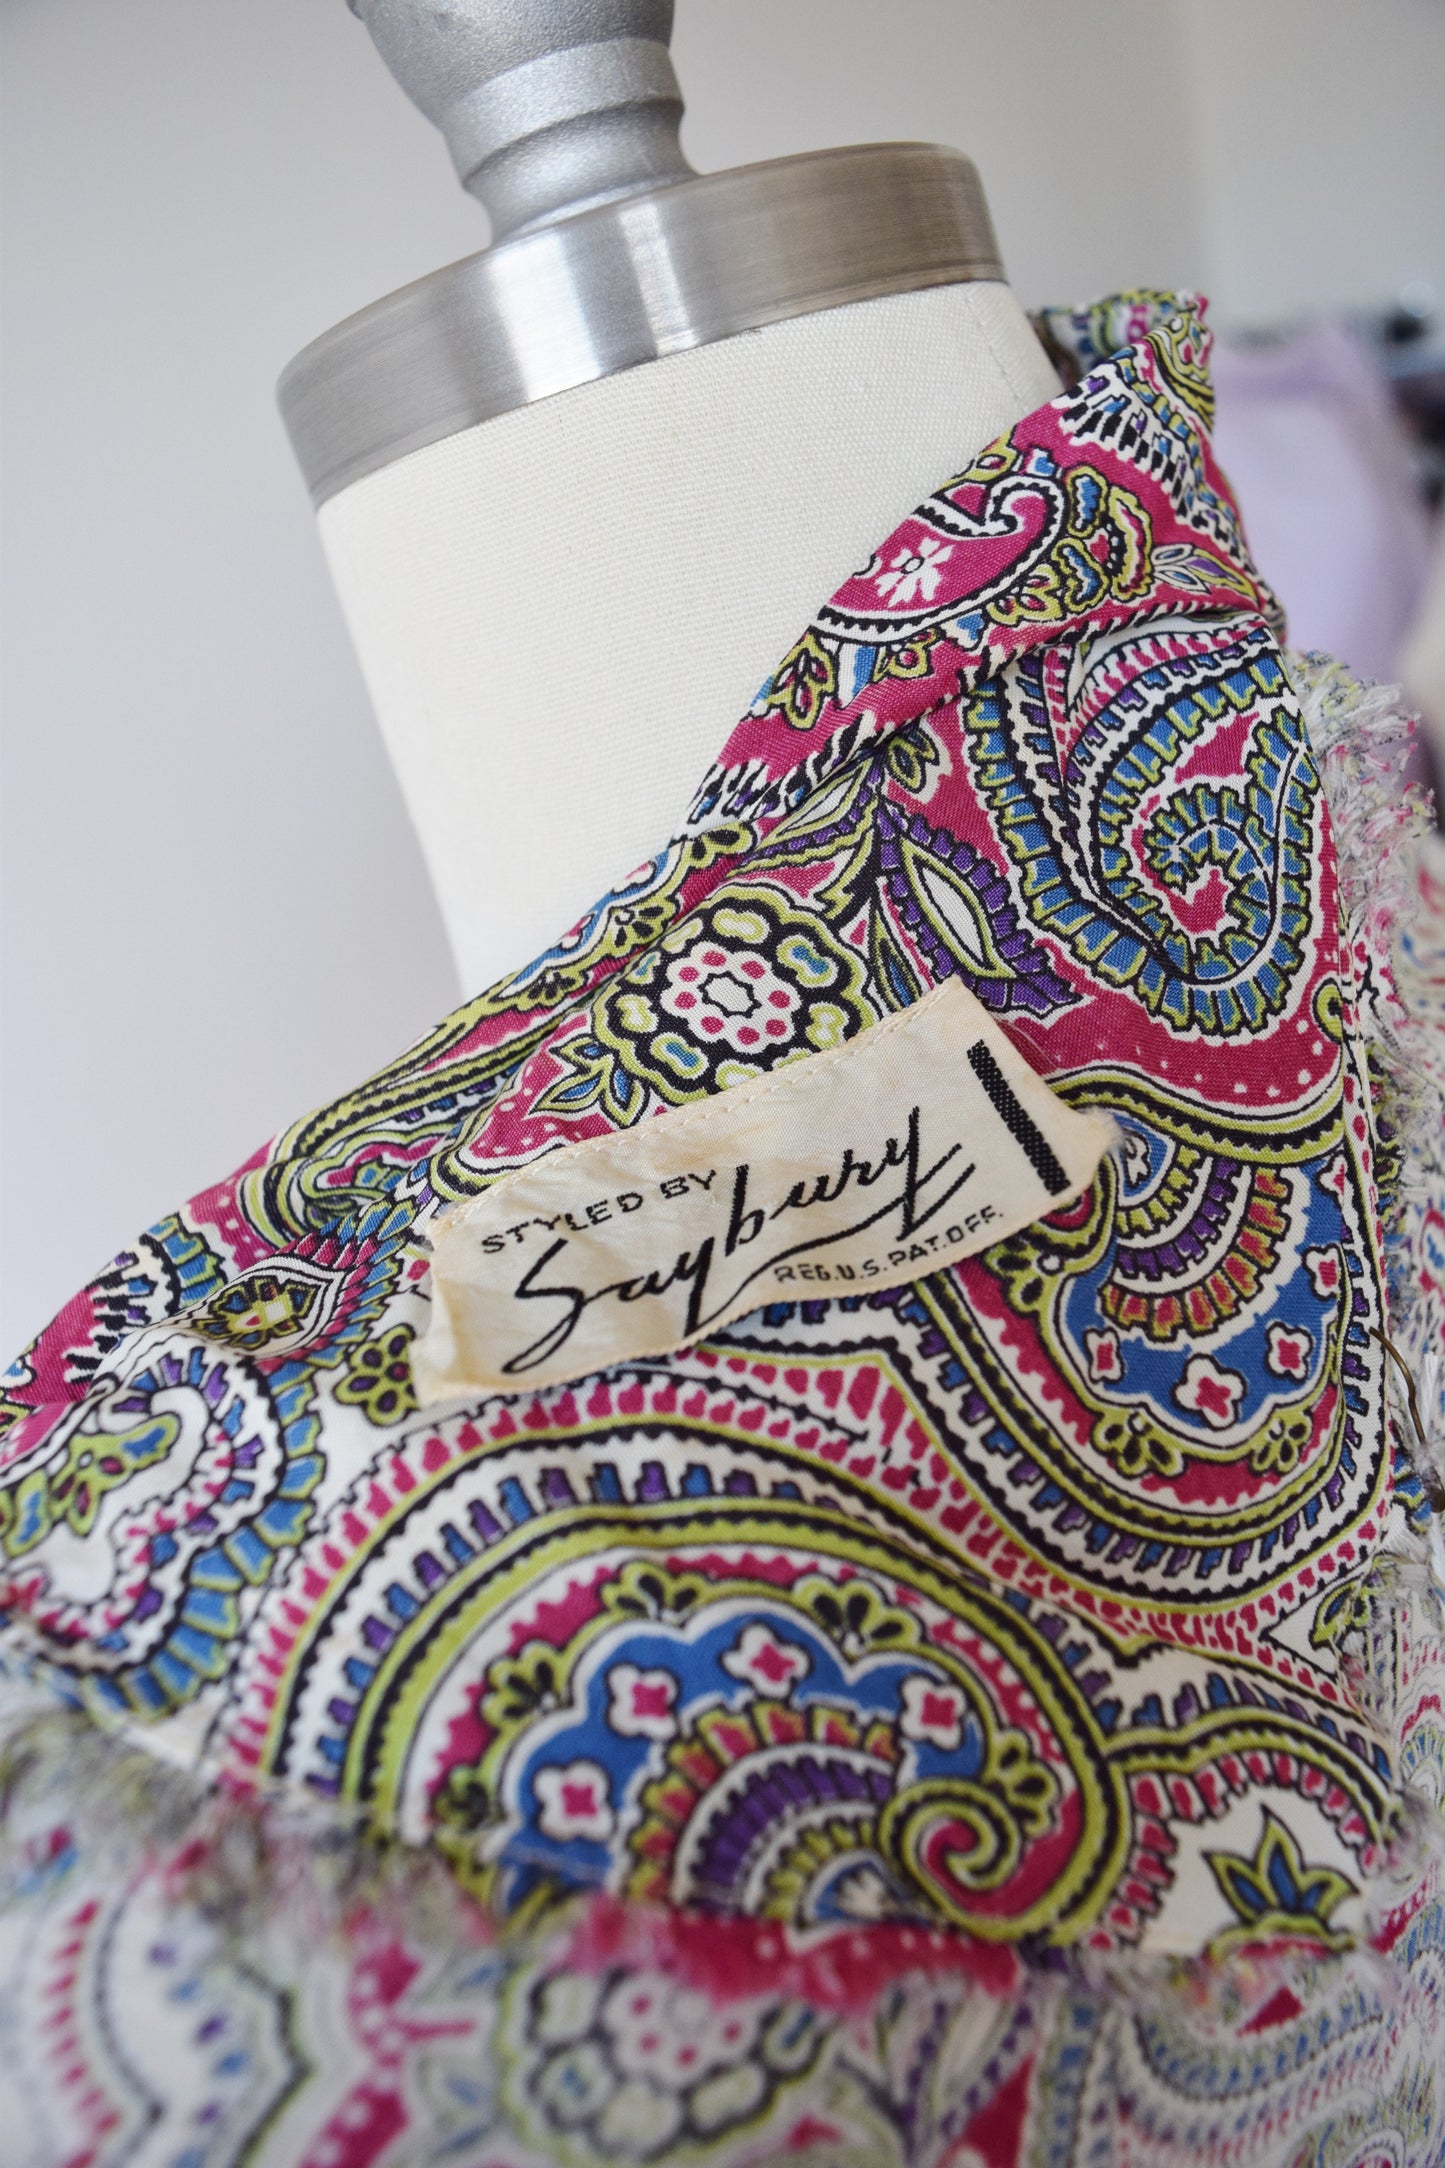 1940s Cold Rayon Zip Front Dress in Paisley by Saybury | M/L